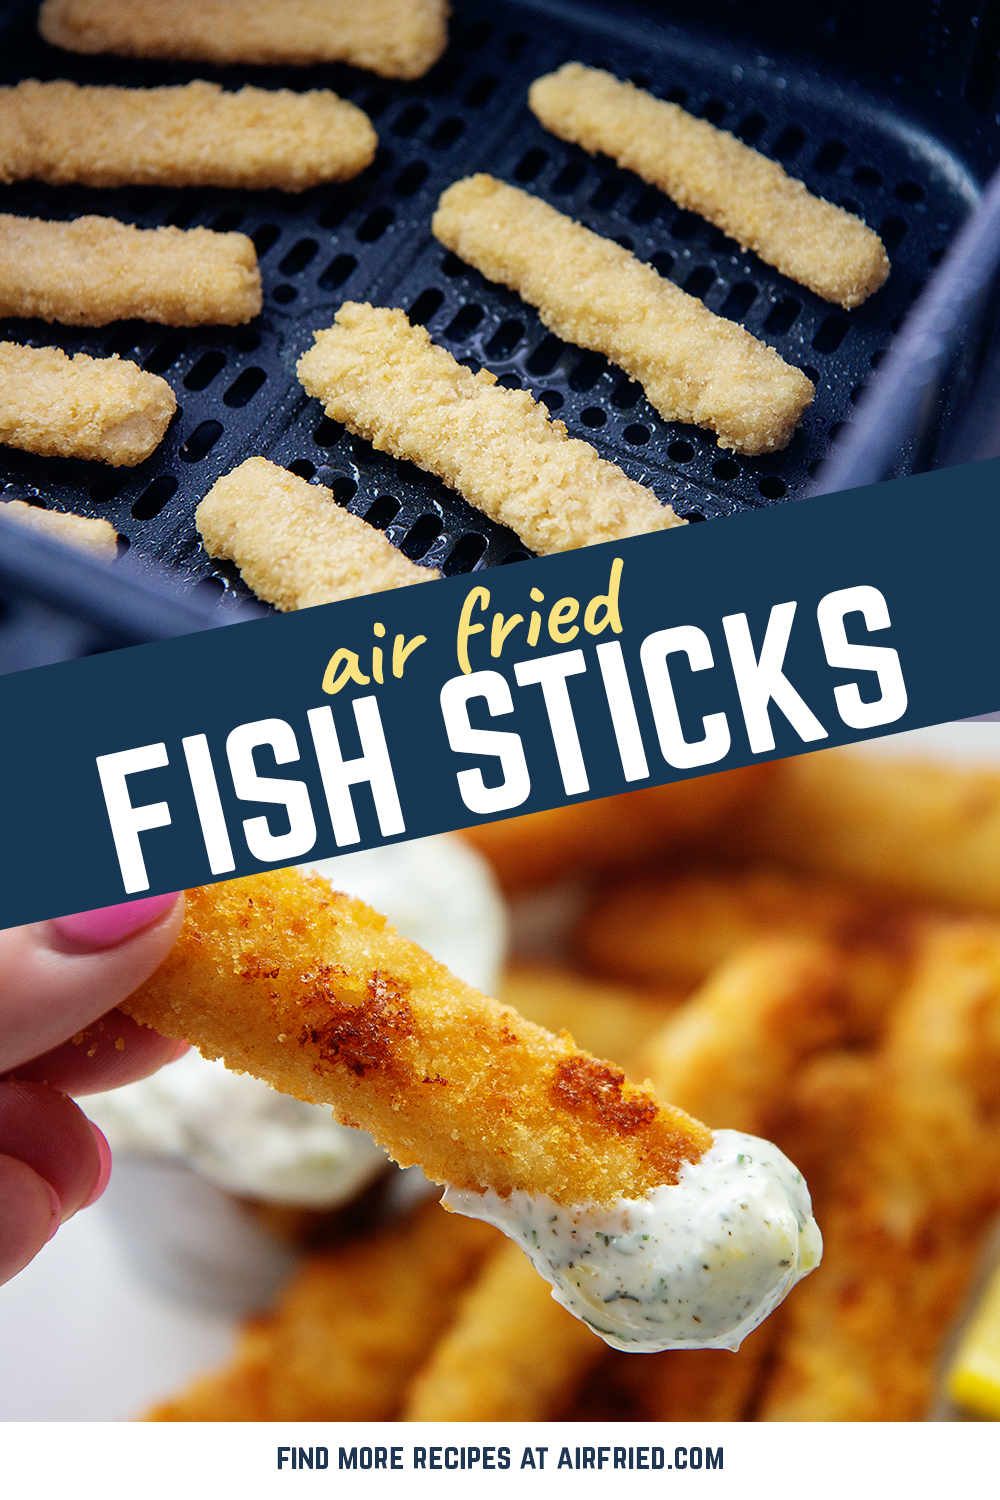 Try out these air fried fish sticks for a fantastic, easy midweek lunch!